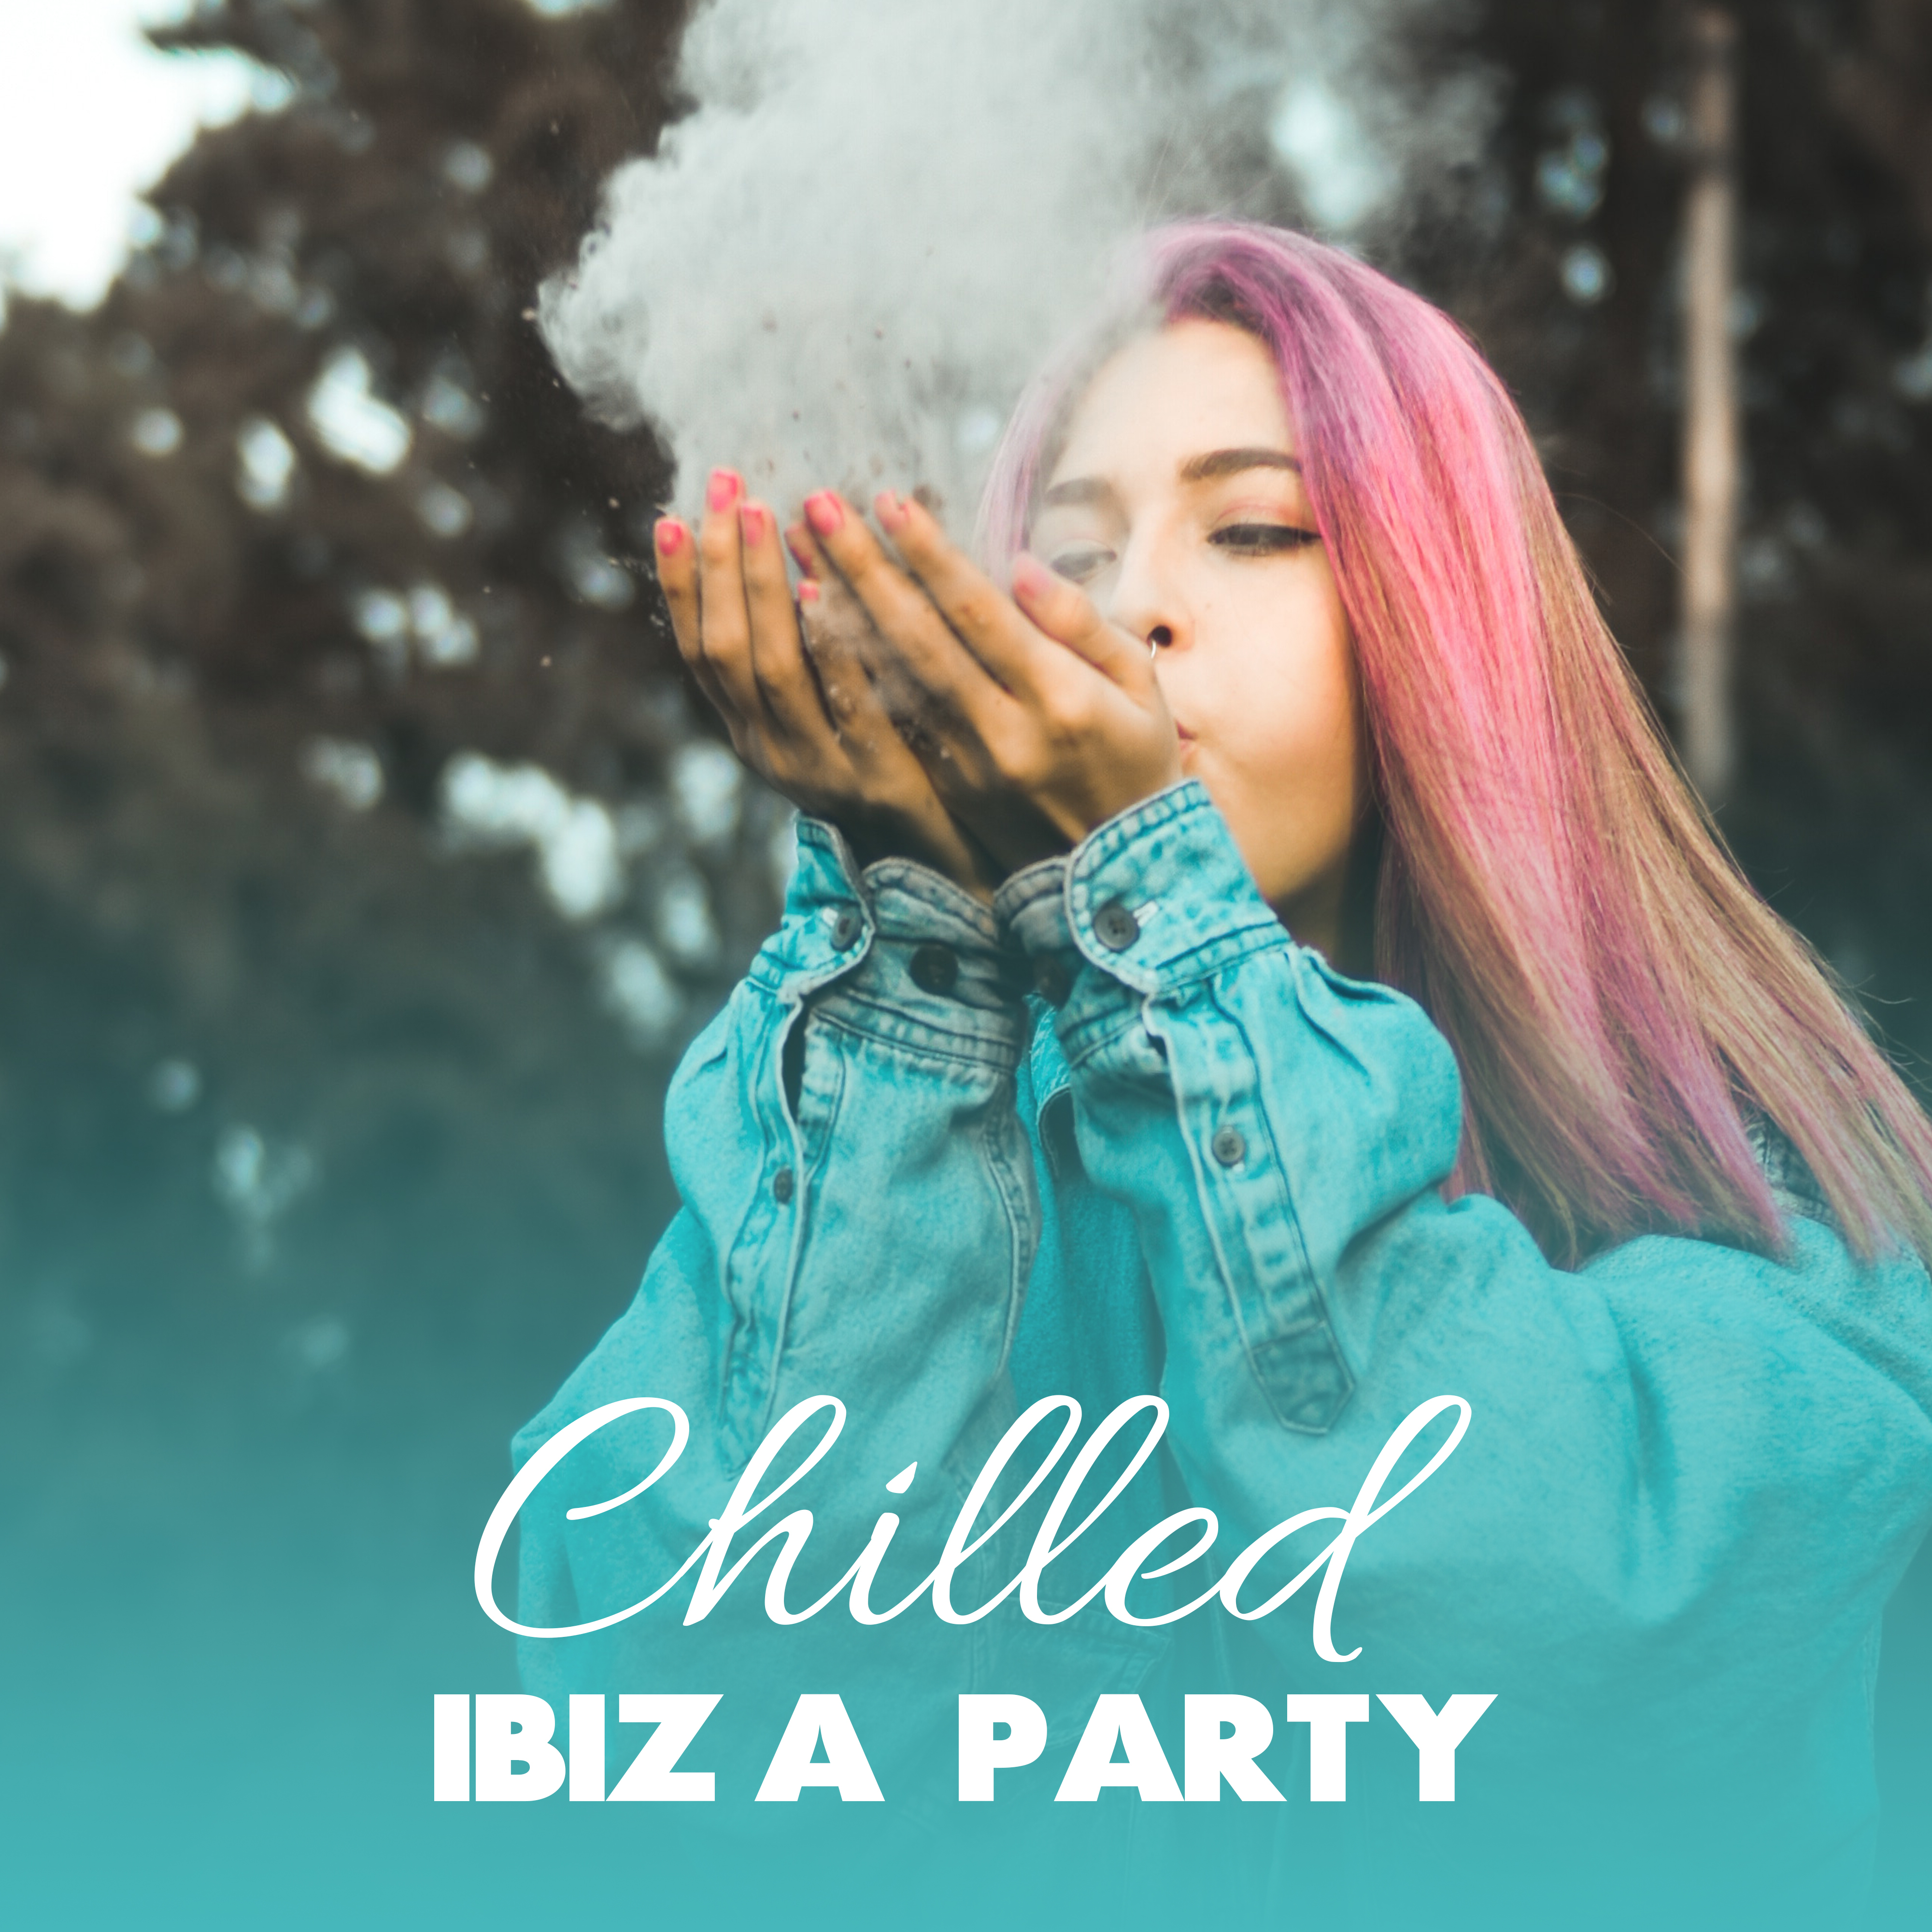 Chilled Ibiza Party